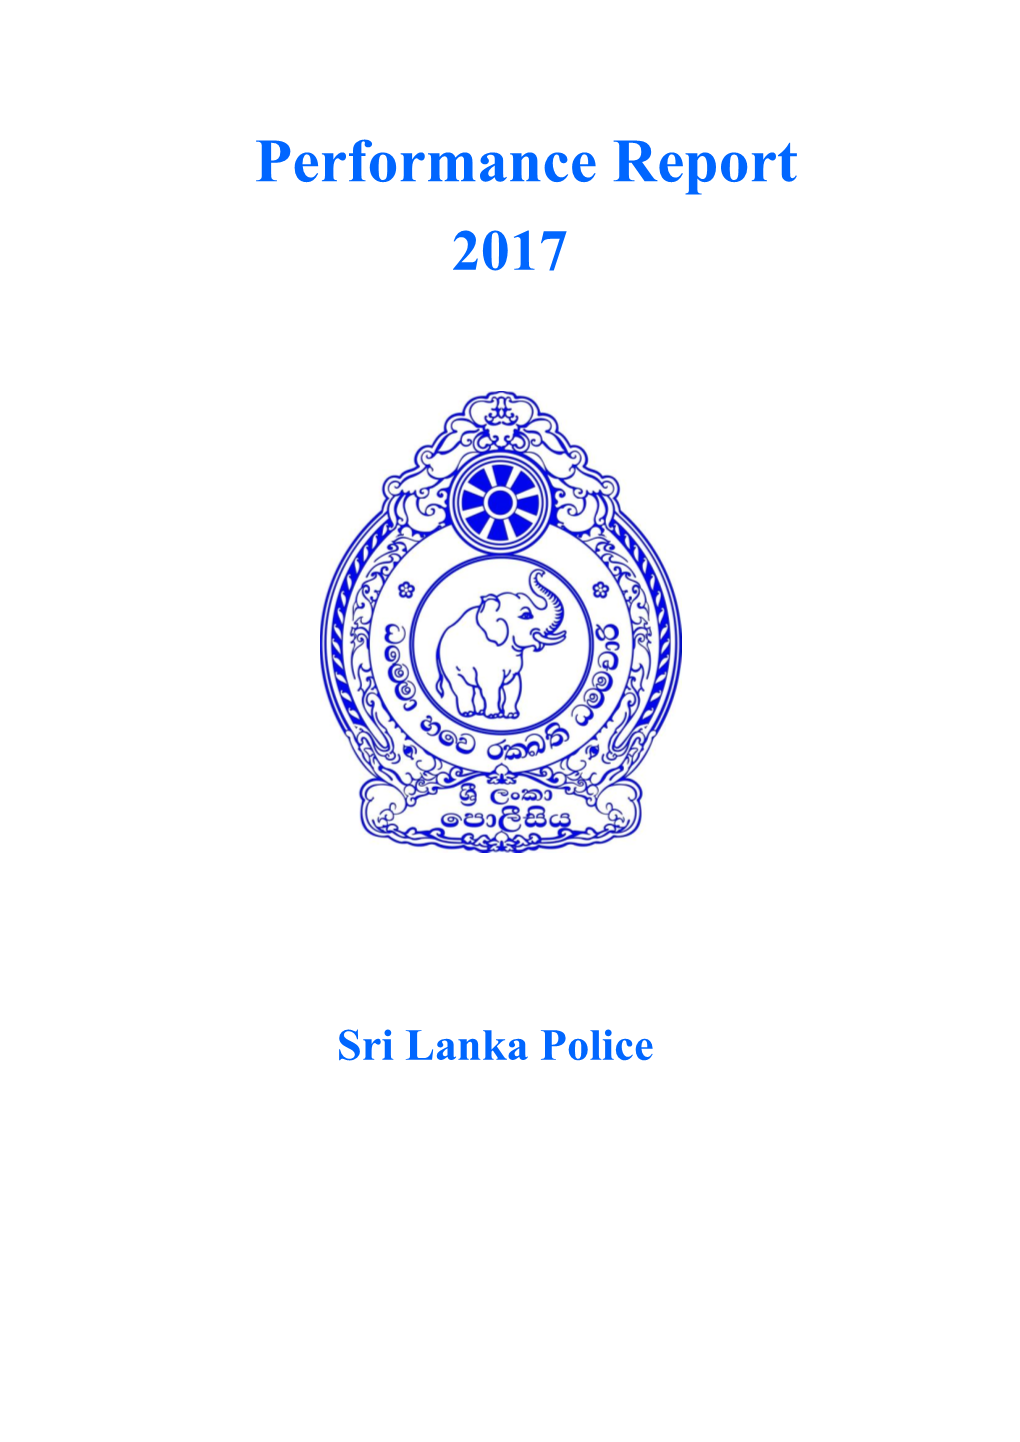 Performance Report of the Sri Lanka Police for the Year 2017